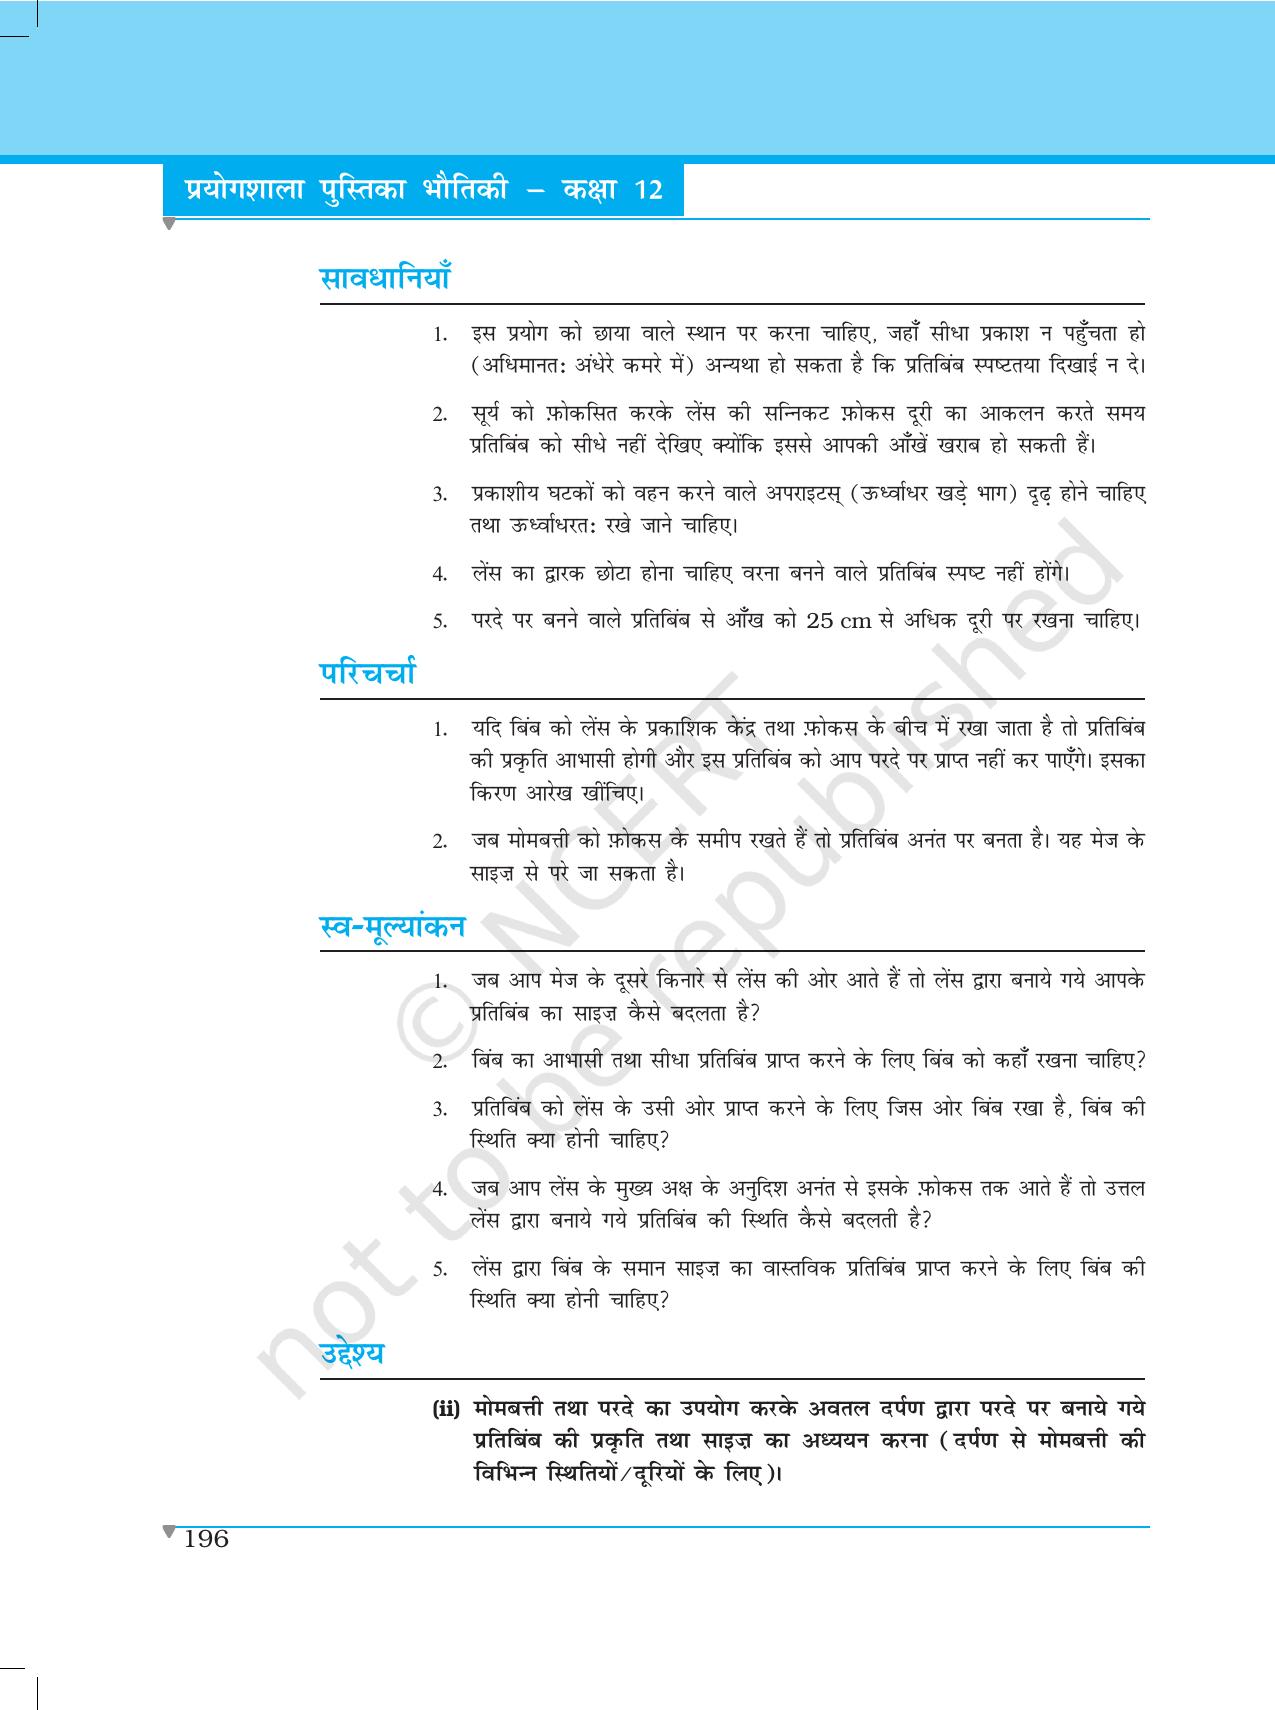 NCERT Laboratory Manuals for Class XII भौतिकी - क्रियाकलाप (12 - 14) - Page 7